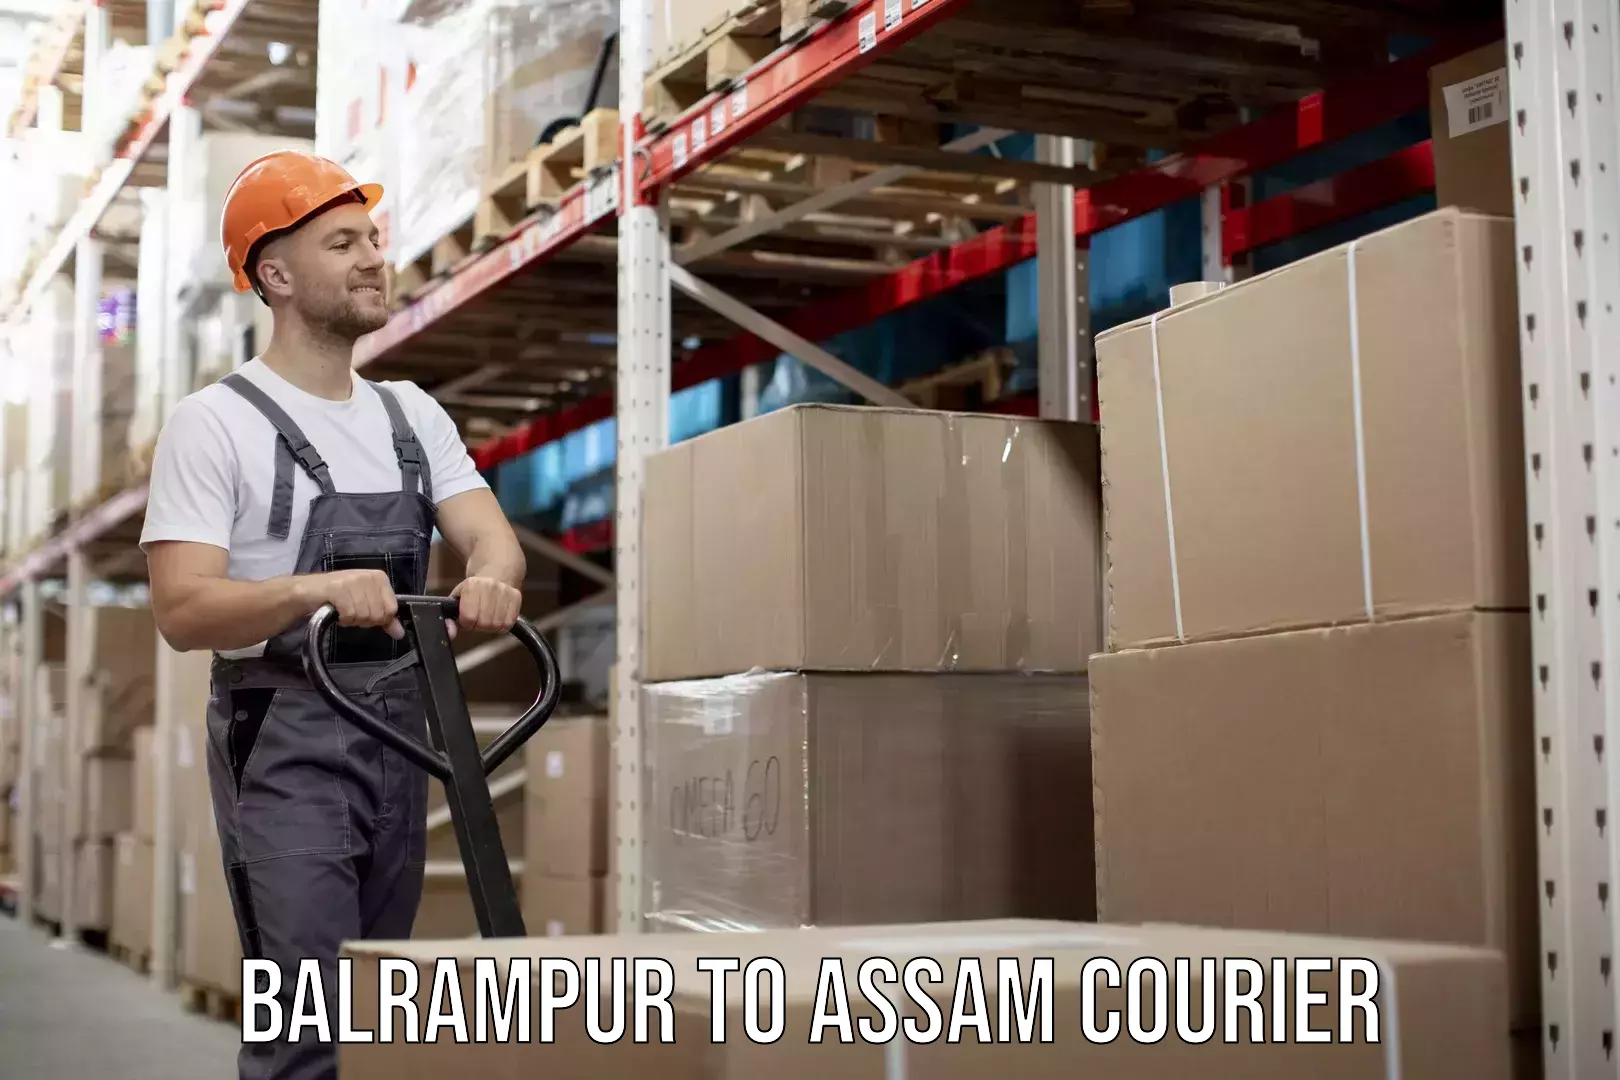 On-call courier service Balrampur to Assam